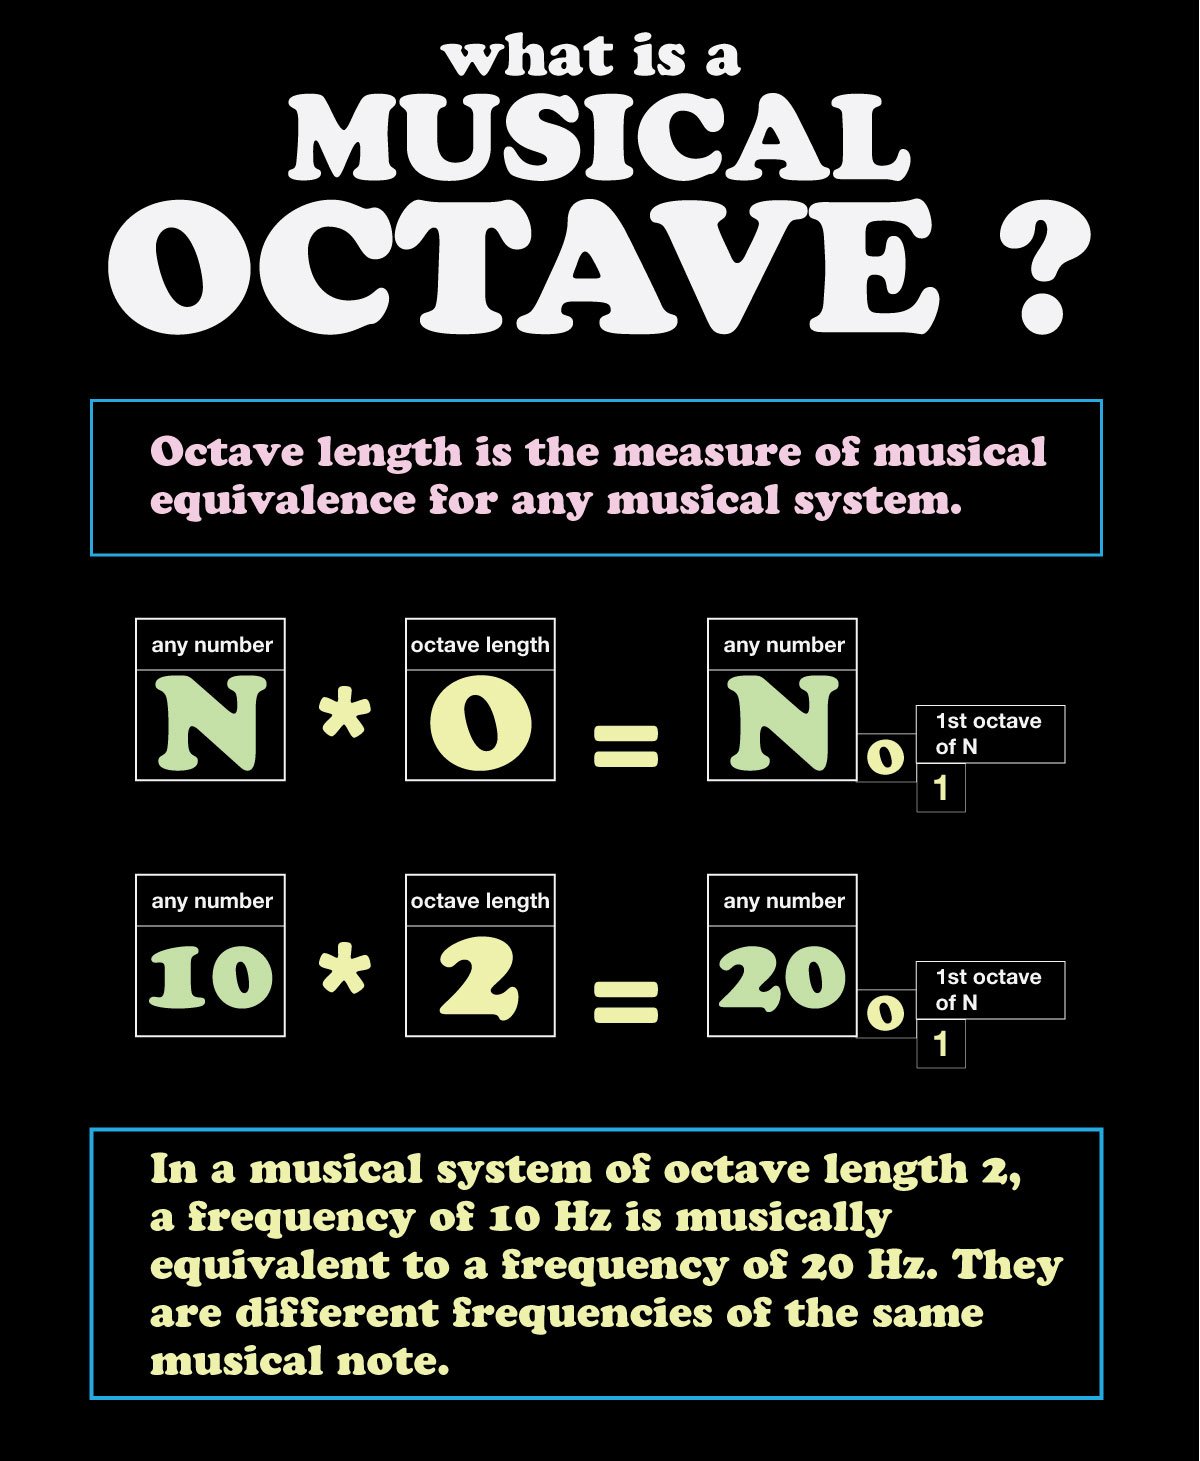 a-musical-octave-illustrated.jpg